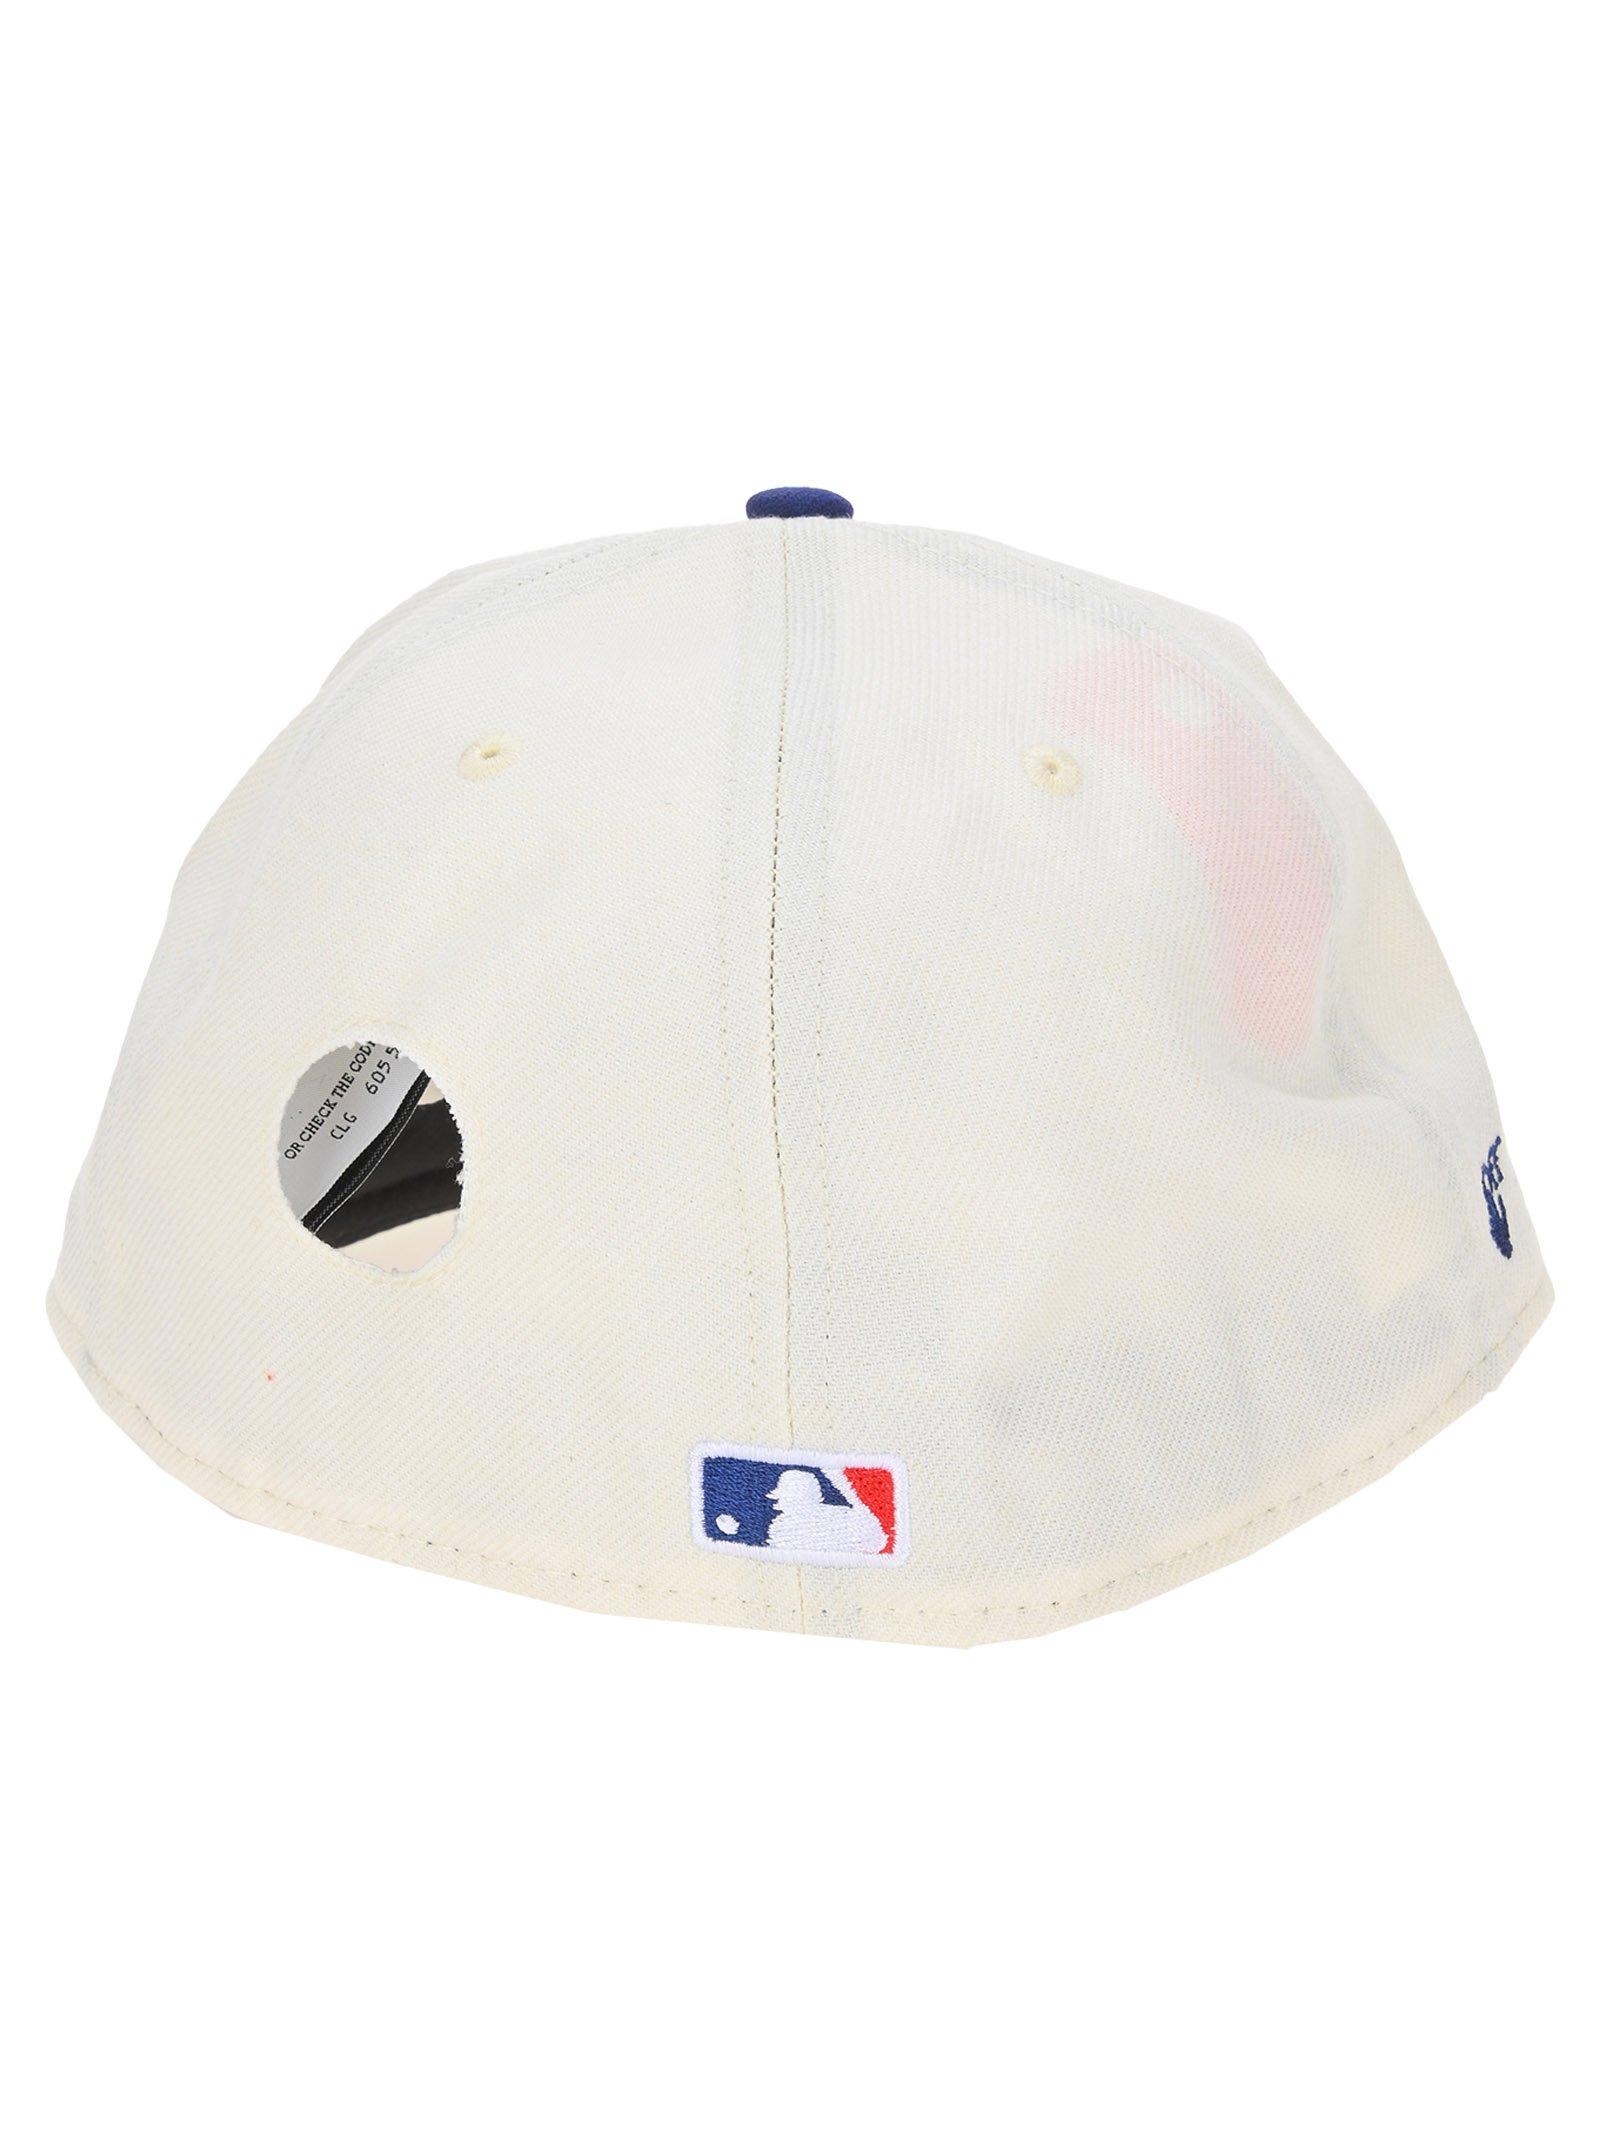 Mens New York Yankees New Era White on White 59FIFTY Fitted Hat